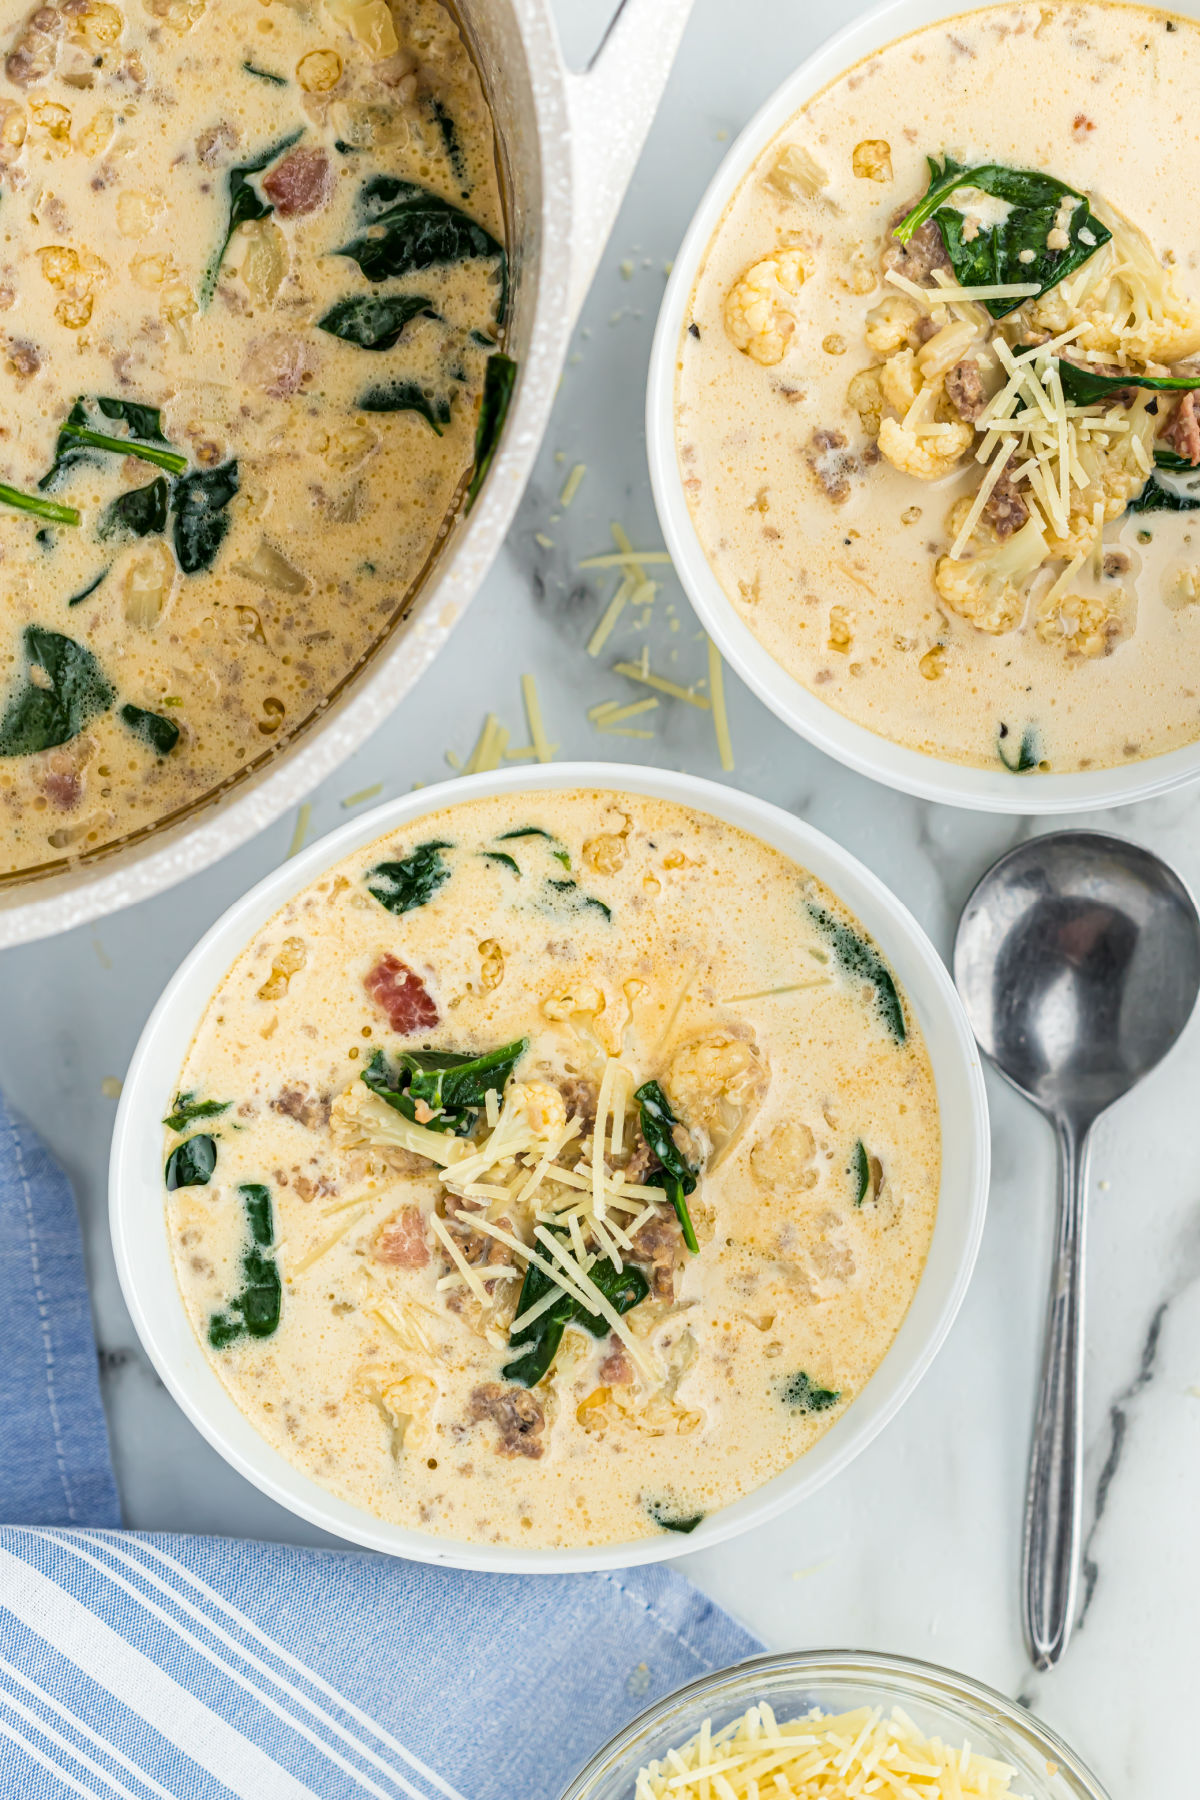 Low carb zuppa toscana soup served in white bowls.